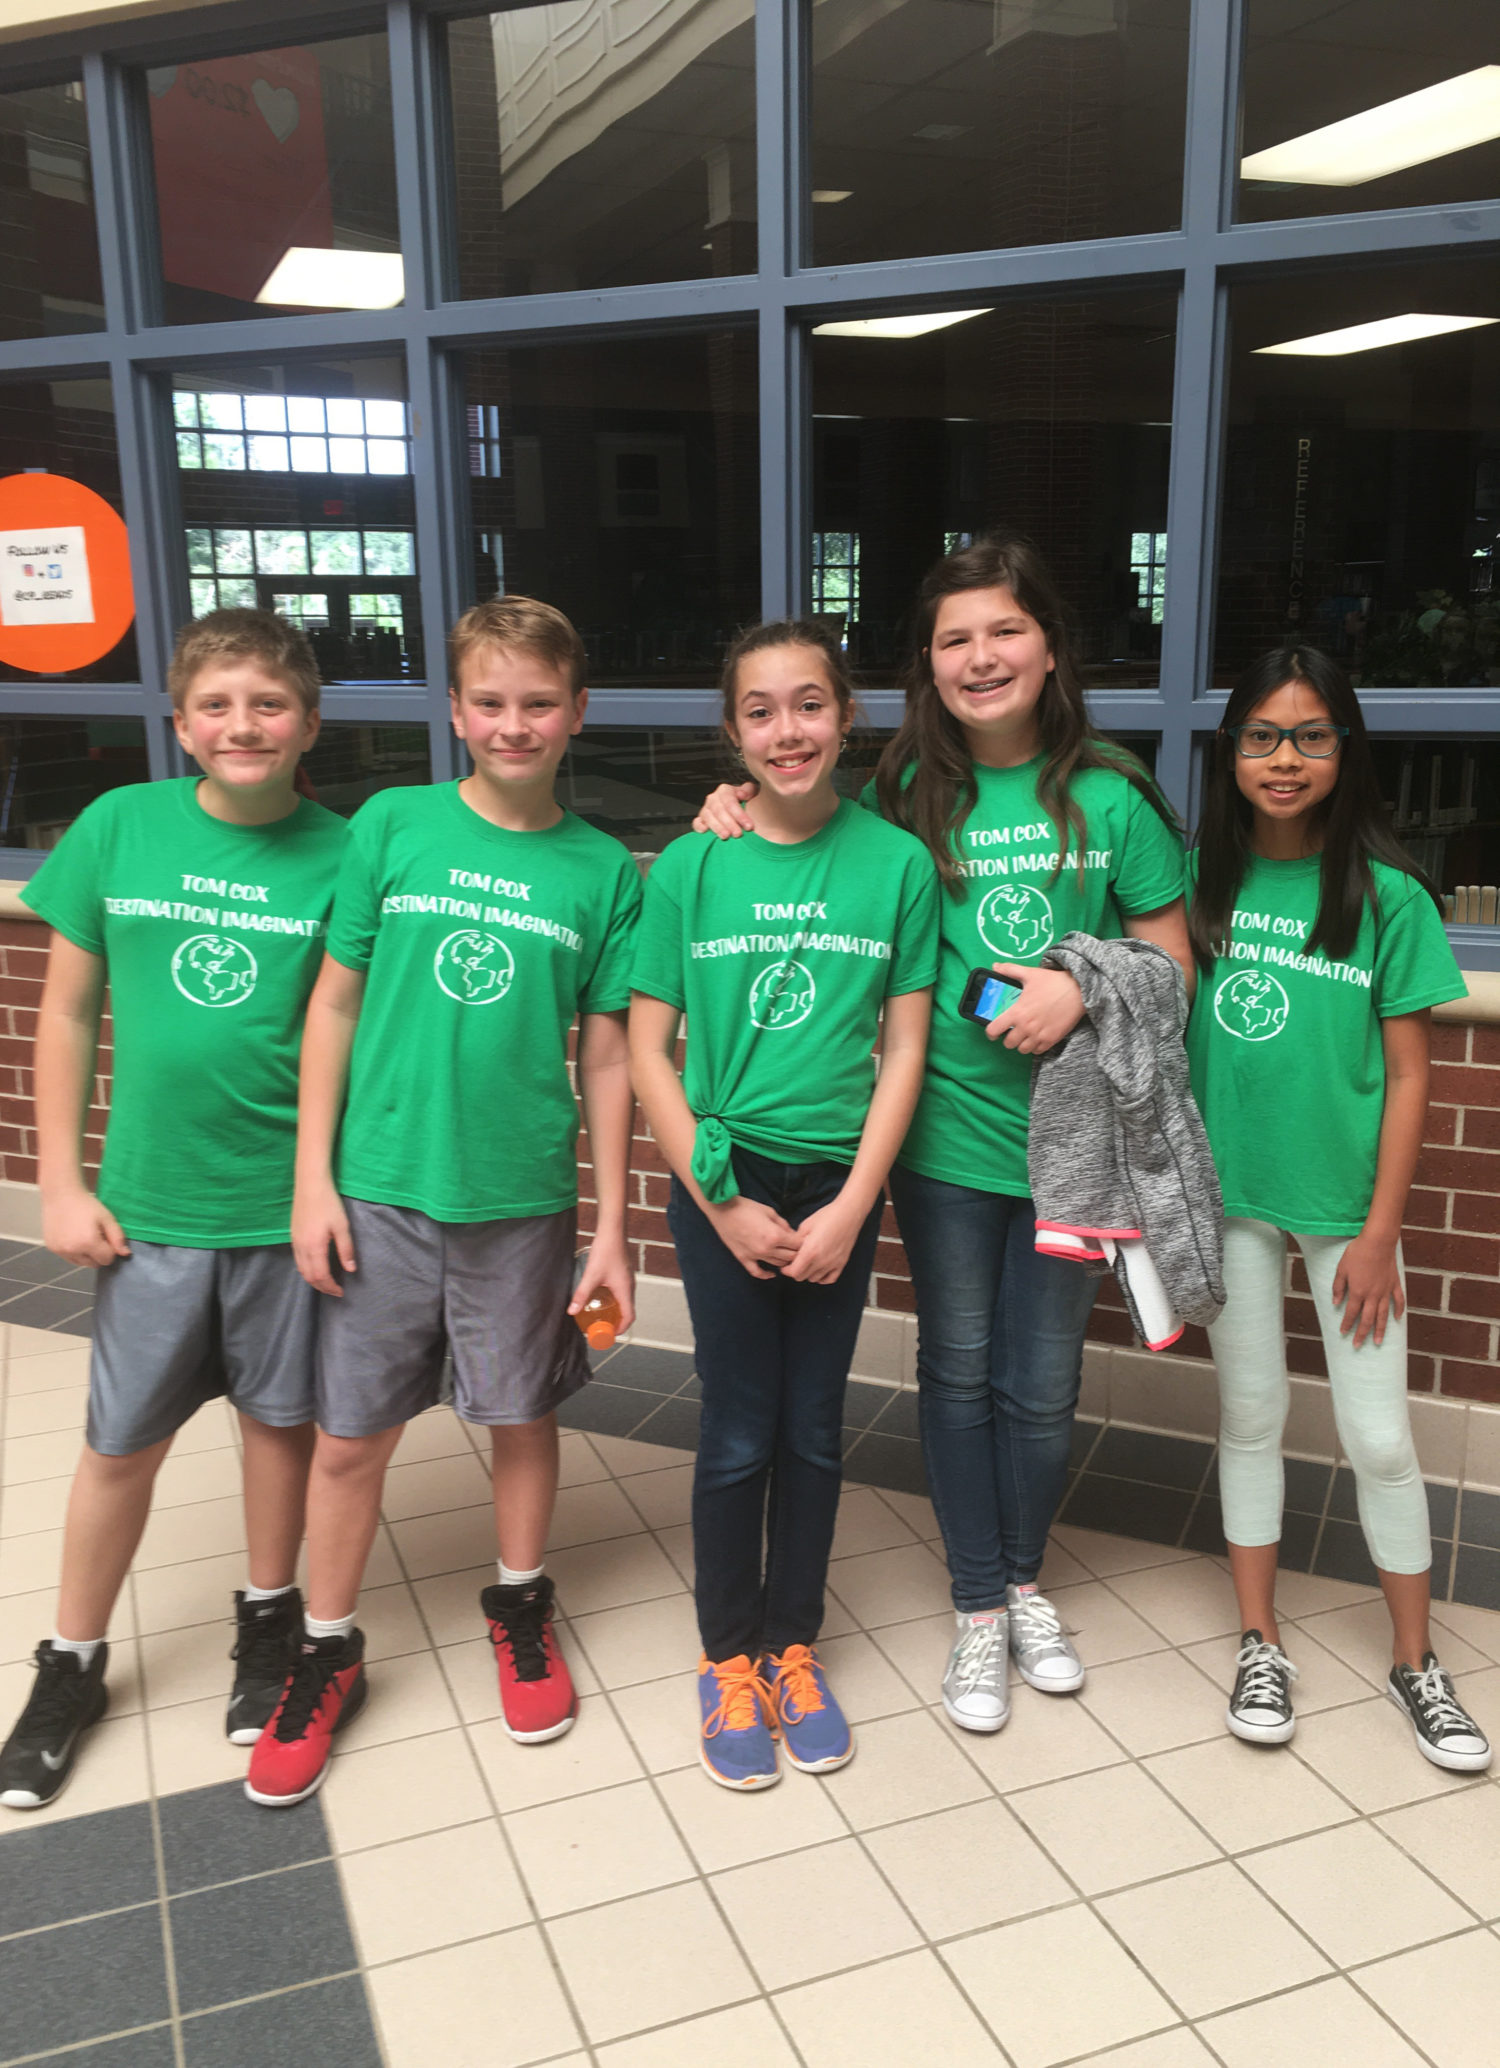 Cox Destination Imagination team, The Terrific Timberwolves, enjoyed participating in the Instant Challenge Workshop.